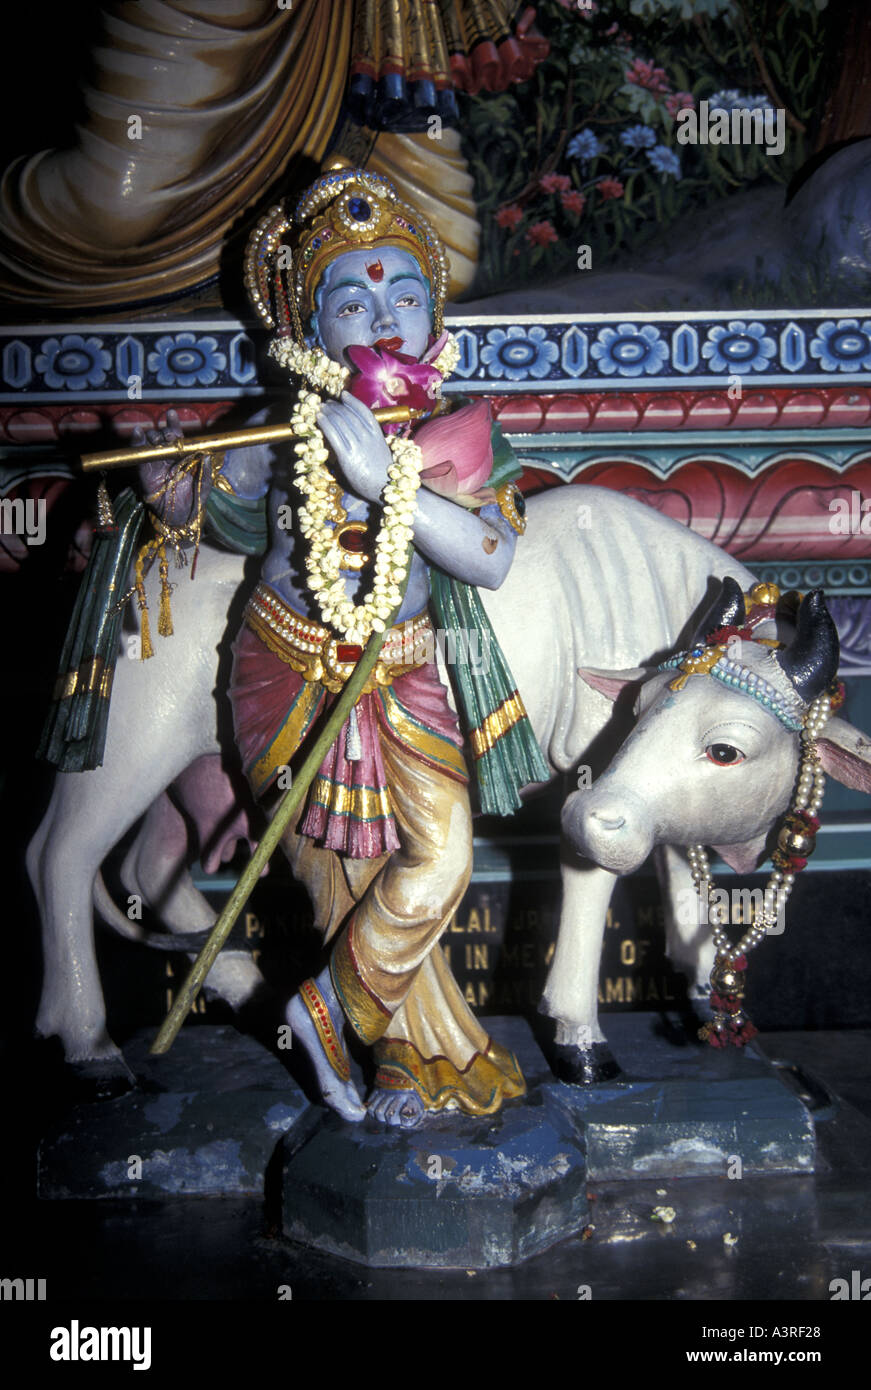 Lord Krishna playing a flute with a sacred cow beside him. A major deity in Hinduism. He is worshipped as the eighth avatar of Vishnu. Stock Photo